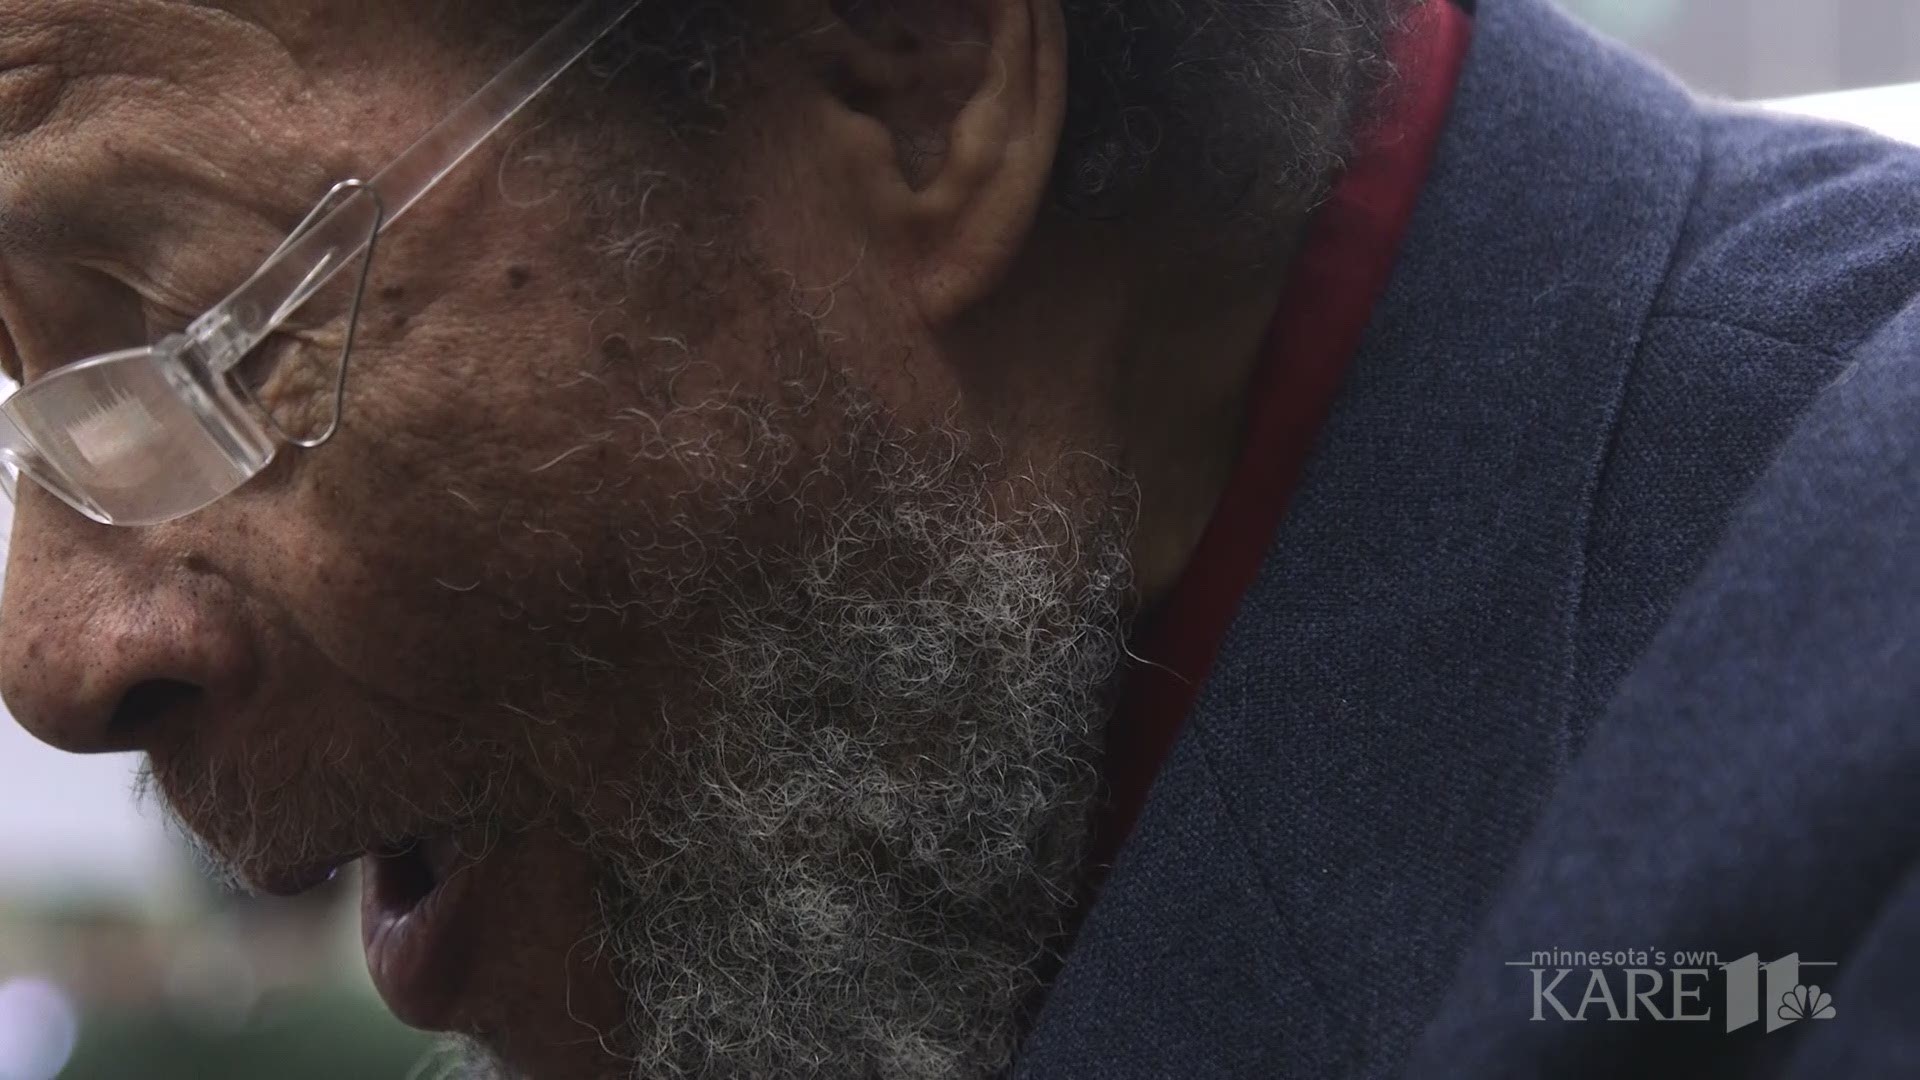 Cornbread Harris, 90, shared with students his love of the keys and his advice for a happy life. https://kare11.tv/2HyiYcg